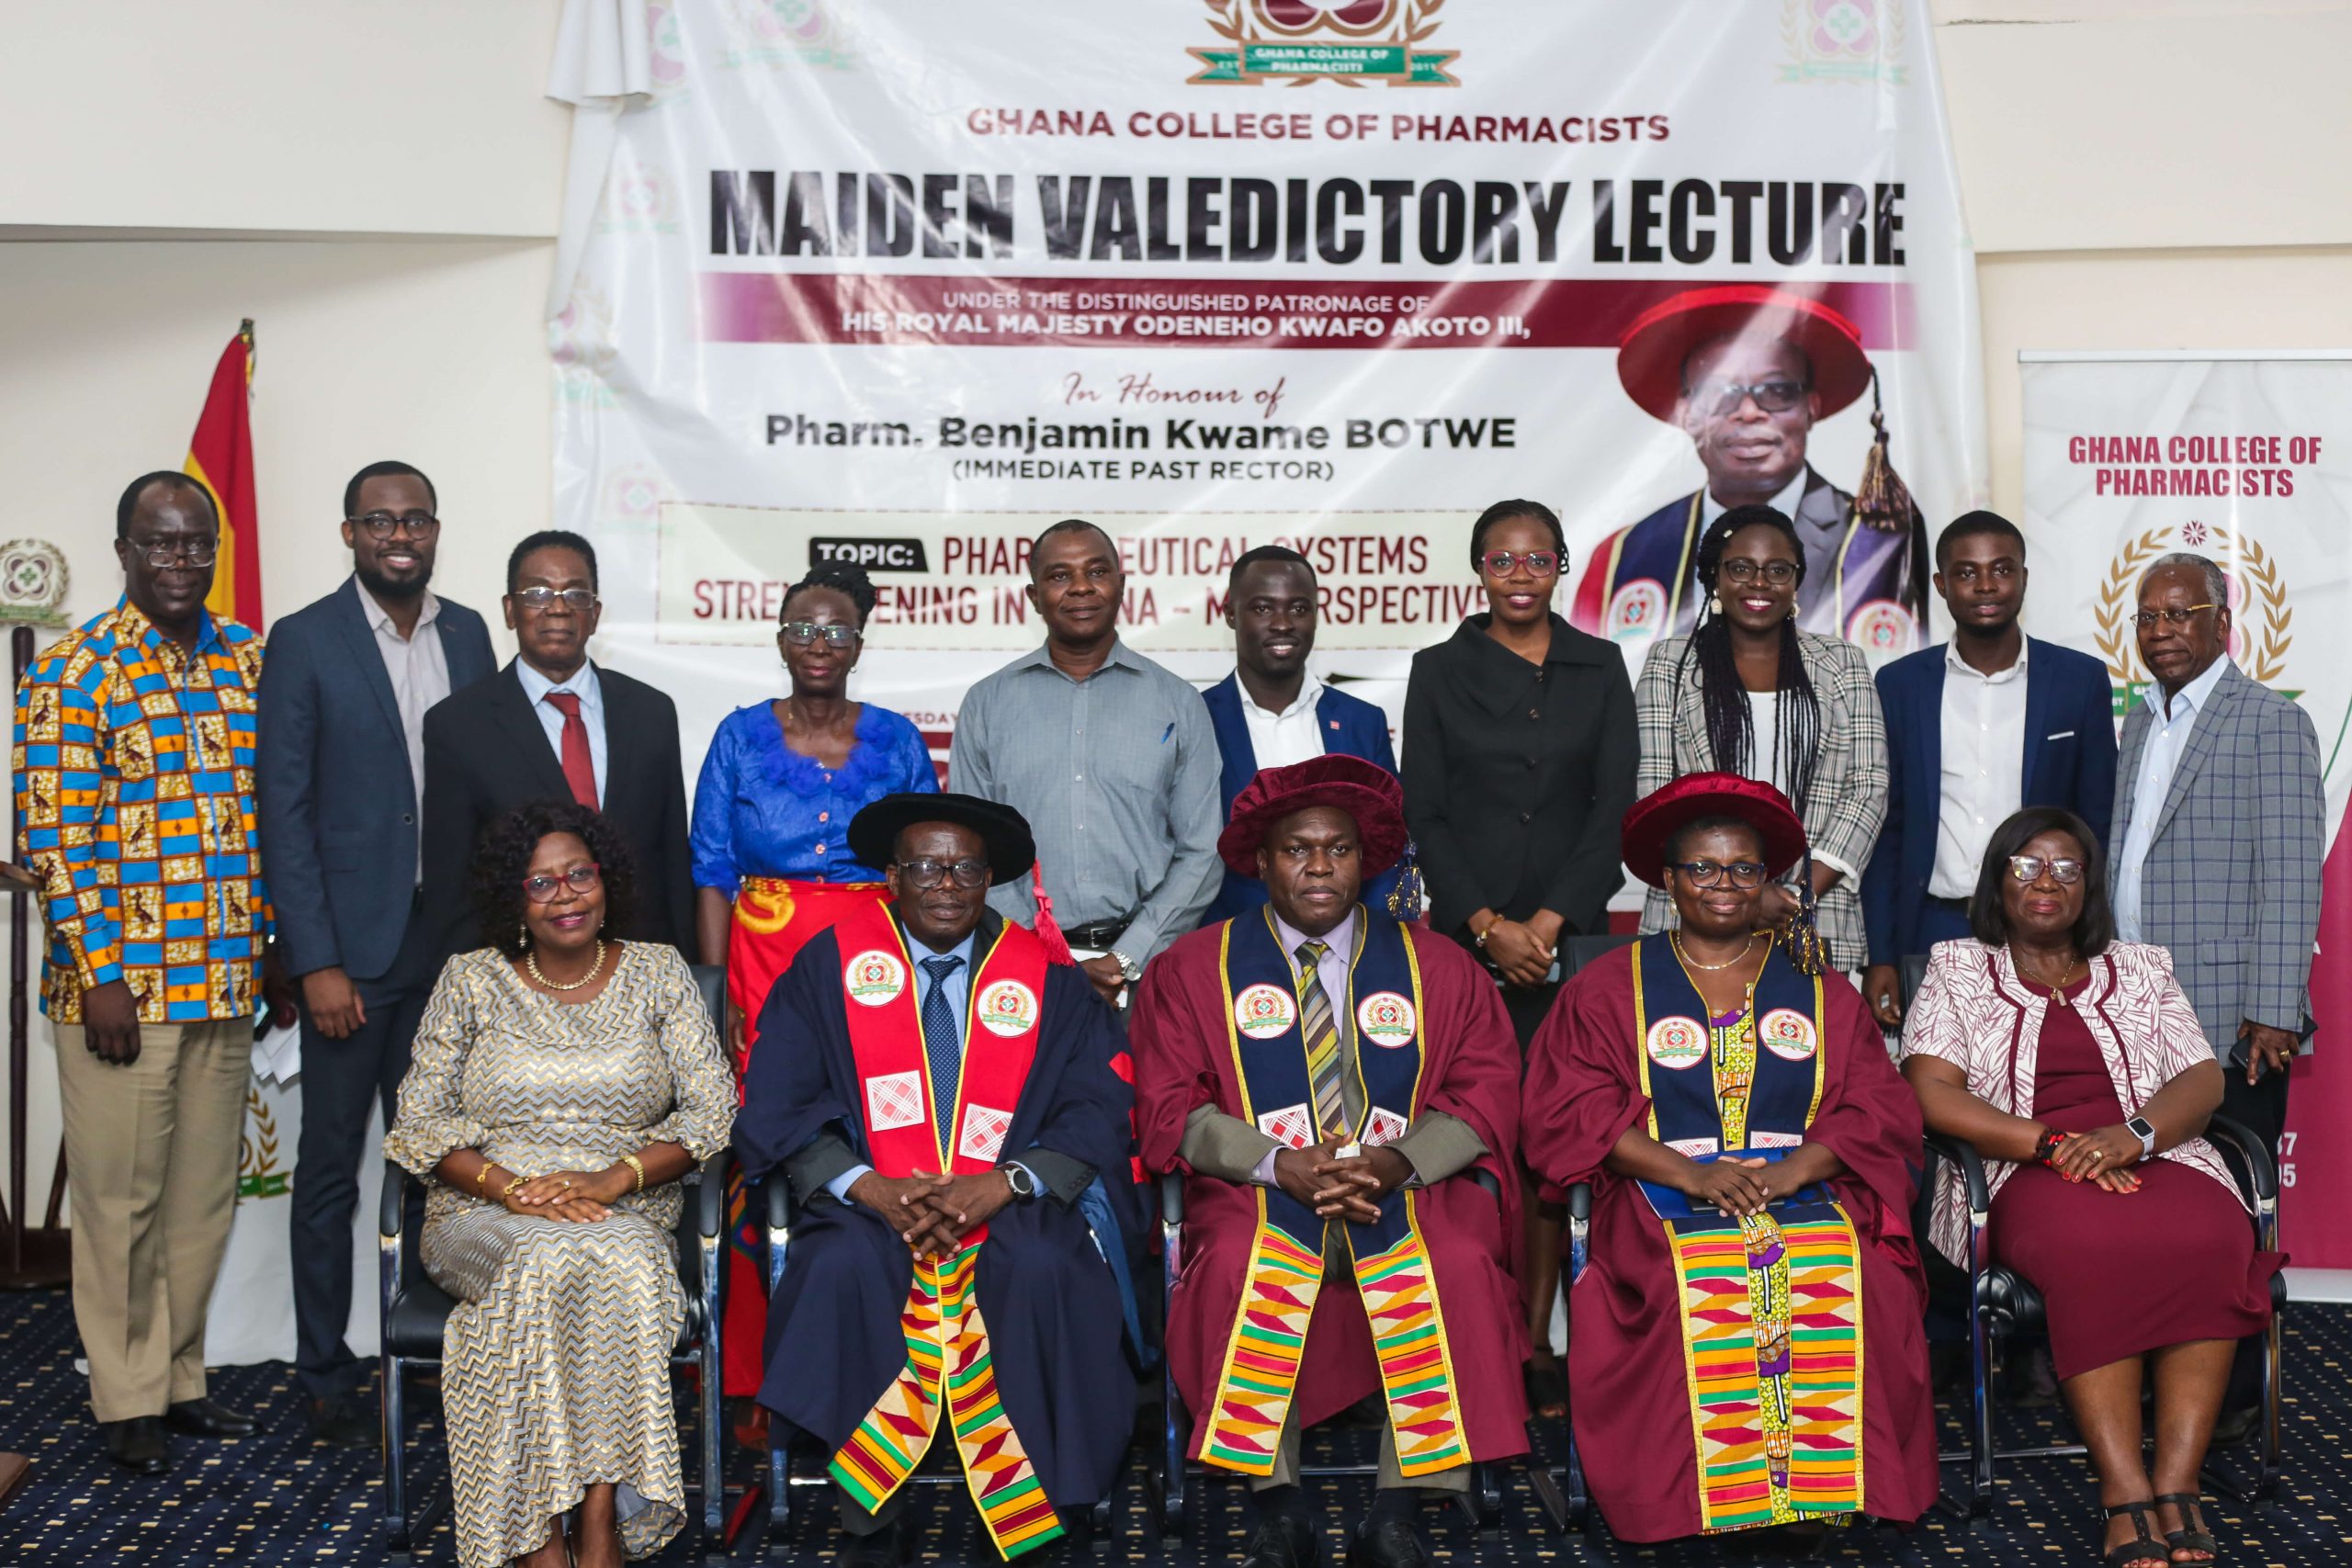 MAIDEN VALEDICTORY LECTURE 2020